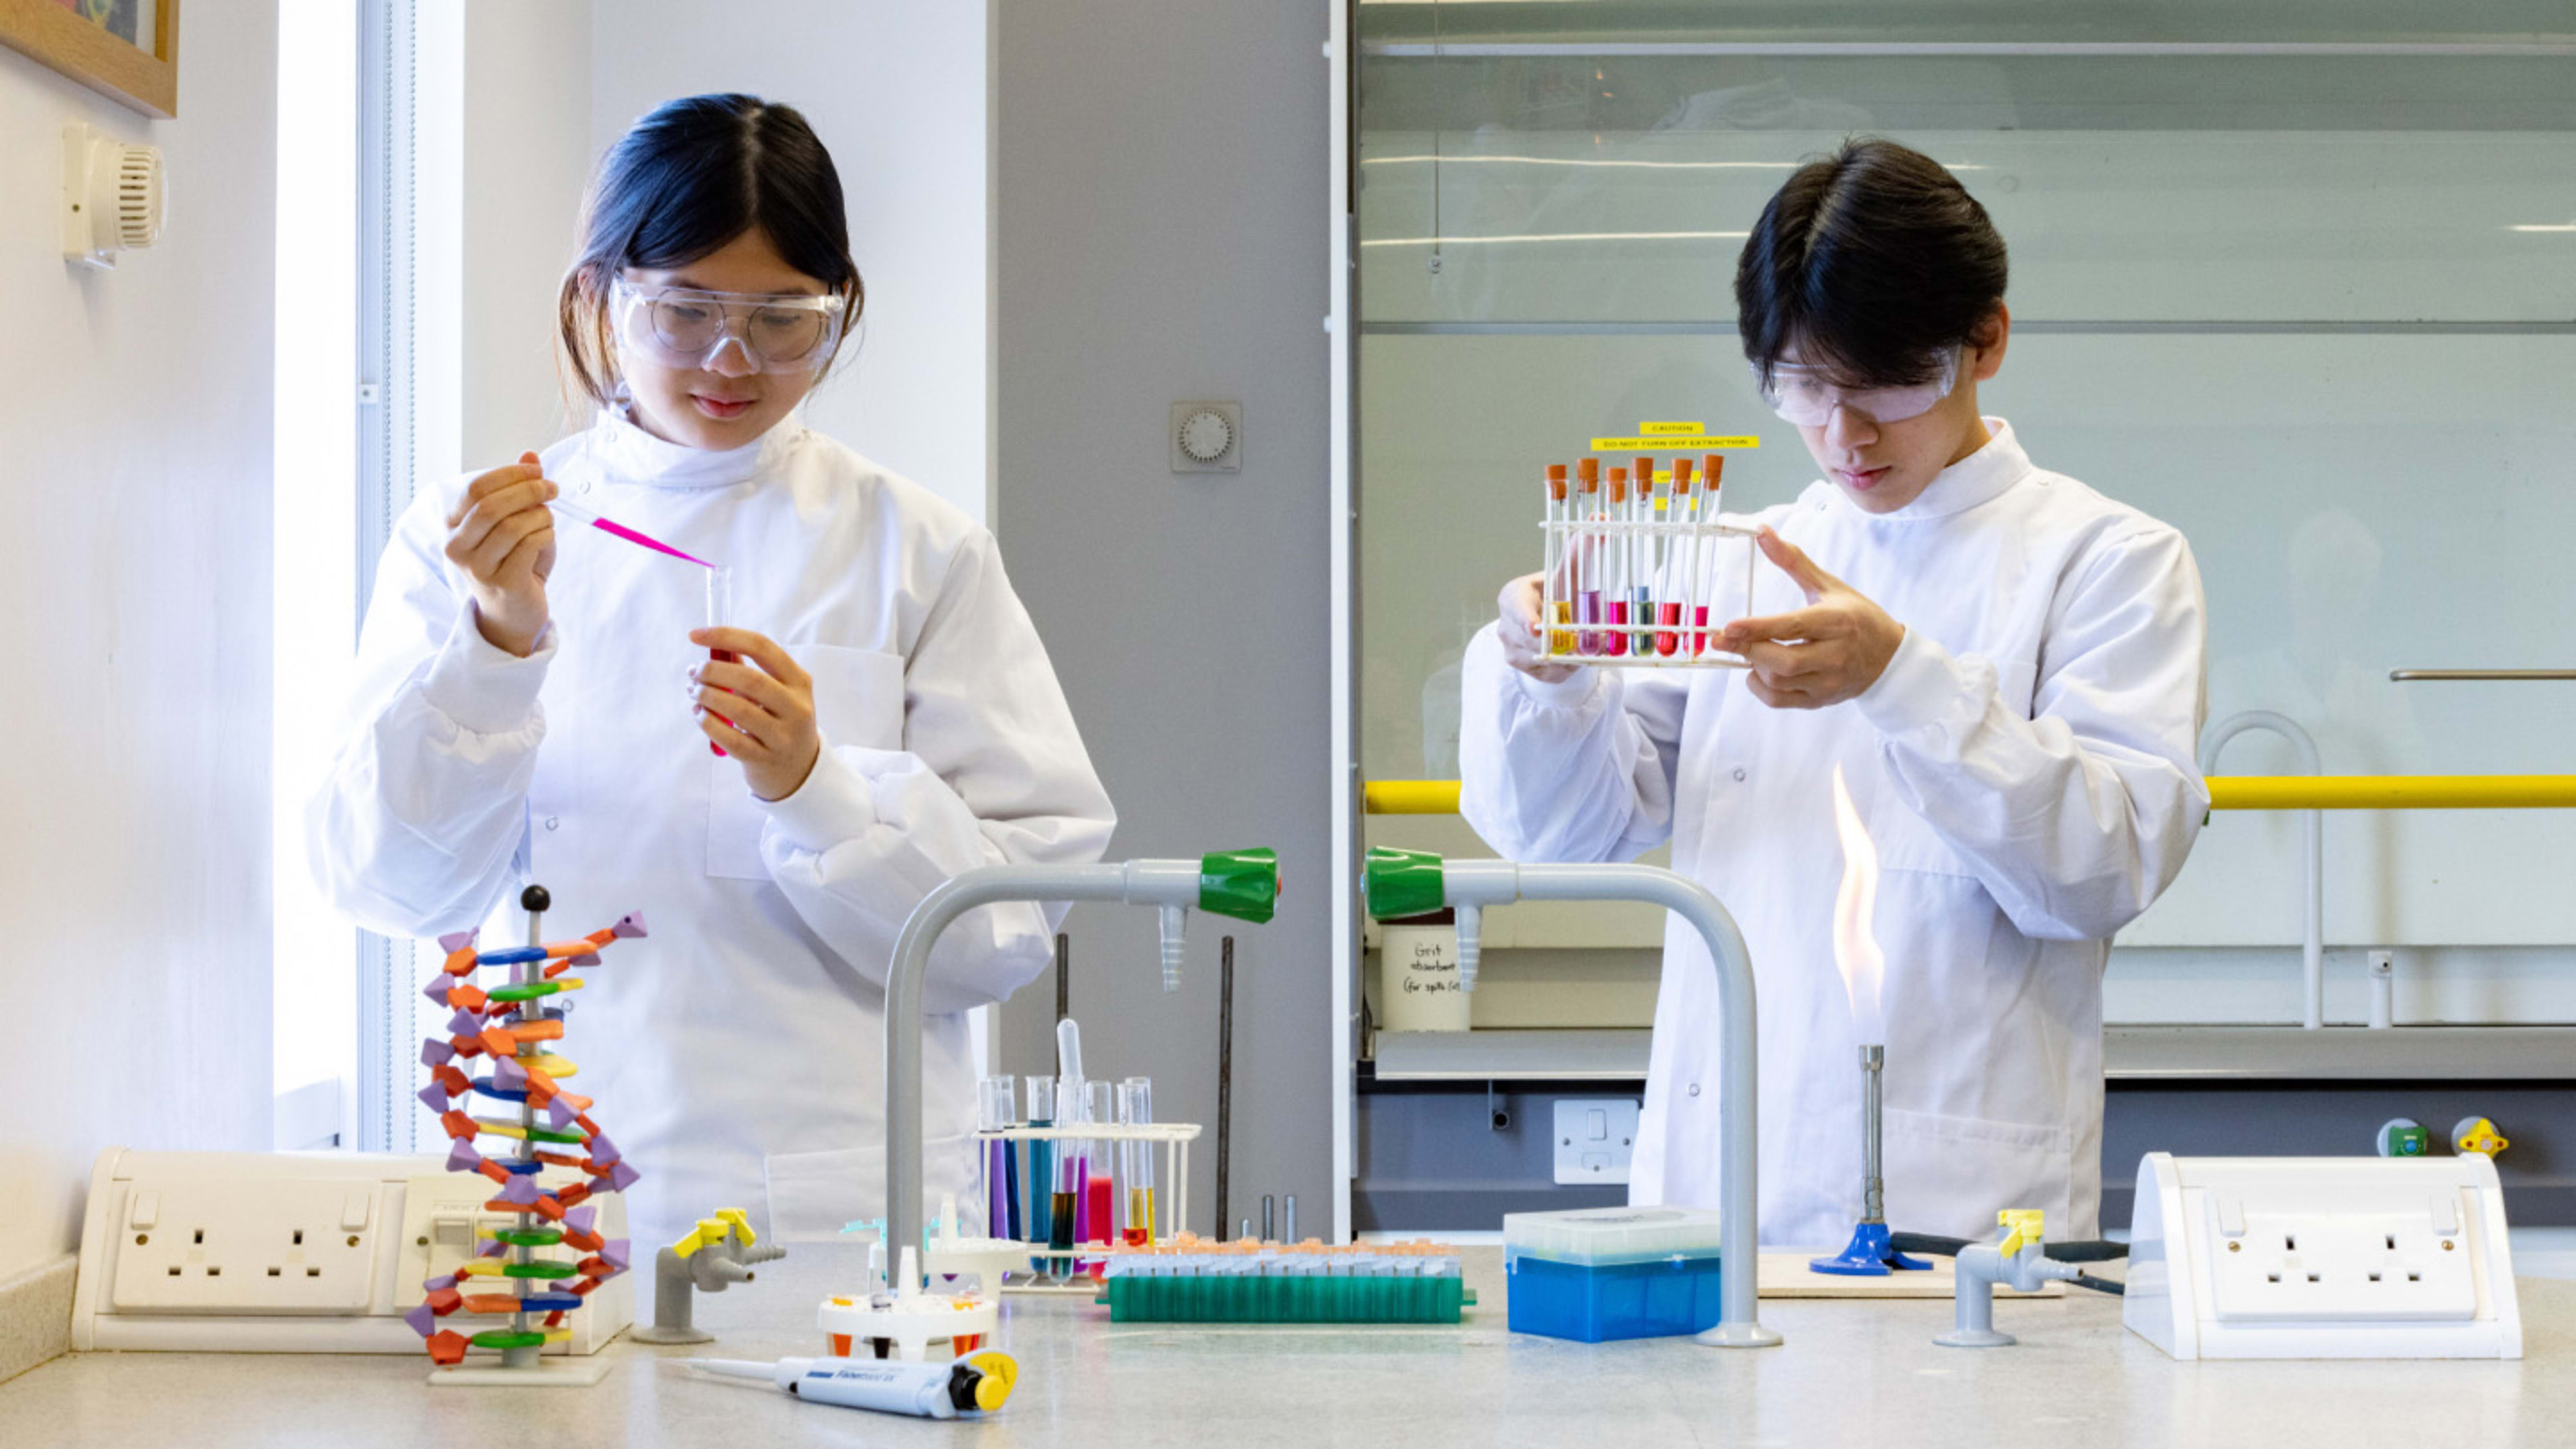 Image of students using science equipment in lab